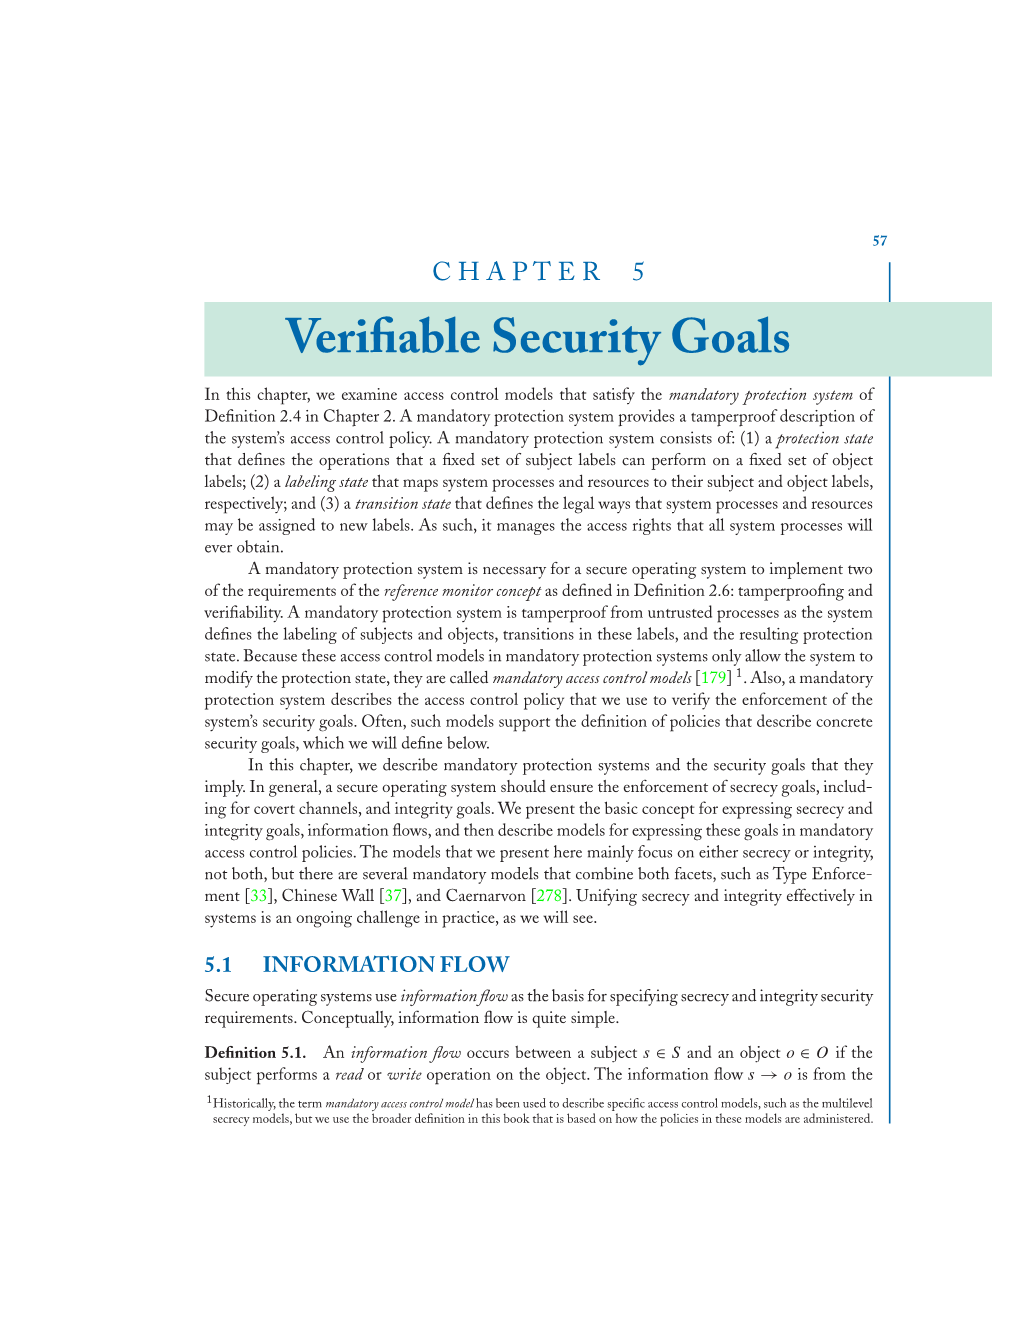 VERIFIABLE SECURITY GOALS Subject to the Object If the Subject Writes to the Object